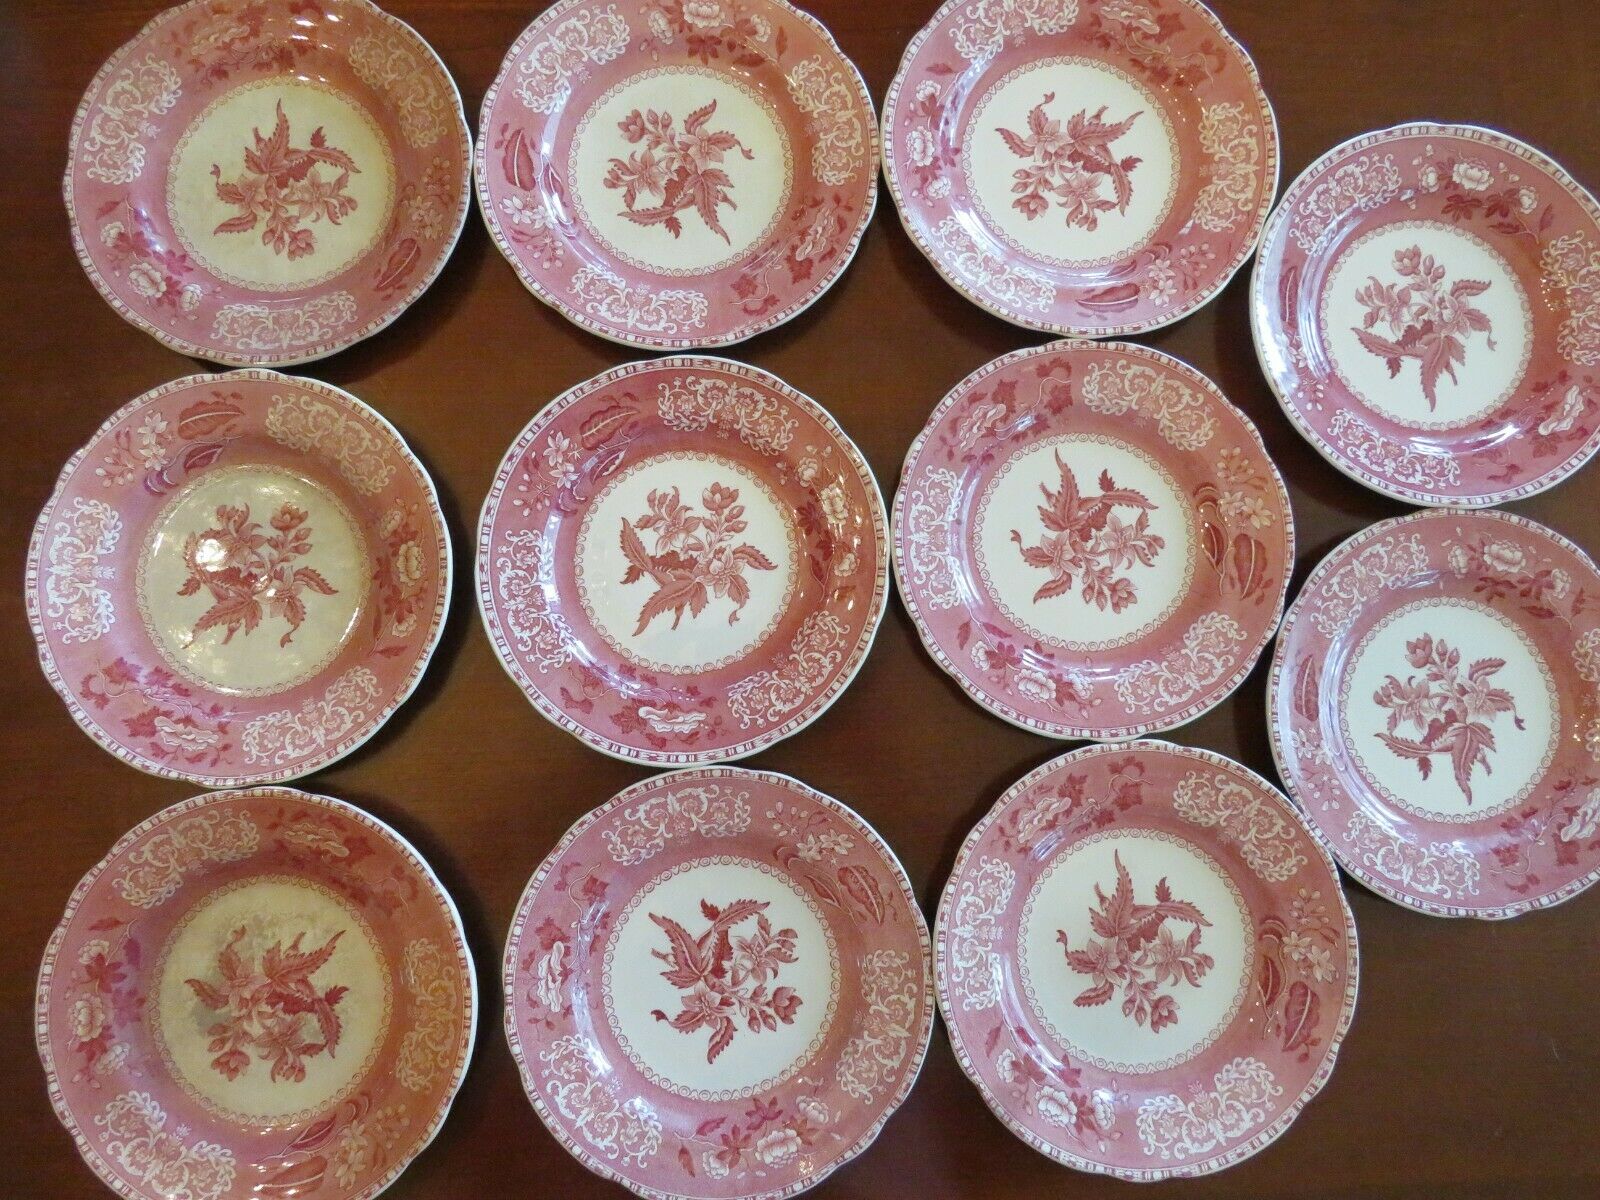 Red Spode Camilla Side Plate, 6 1/8", 1920's